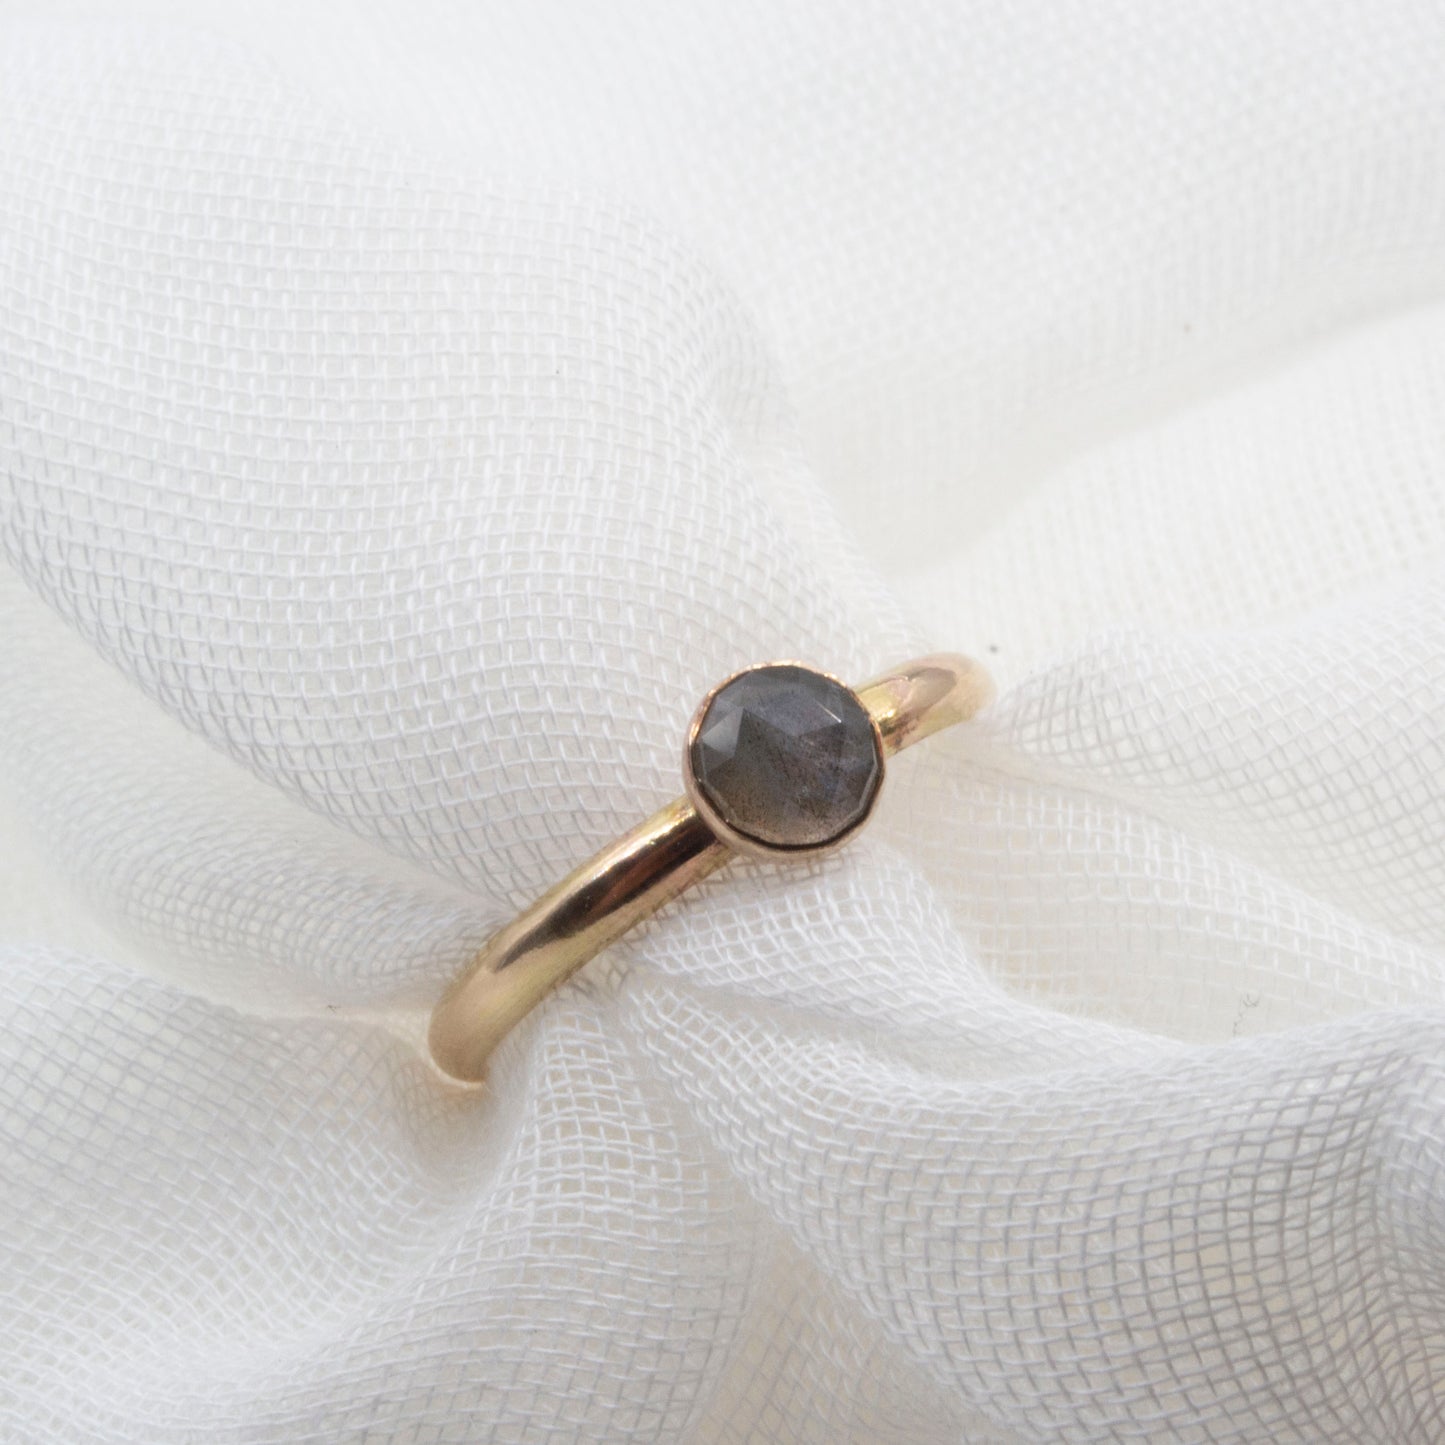 Gold fill ring with 6mm labradorite rose cut